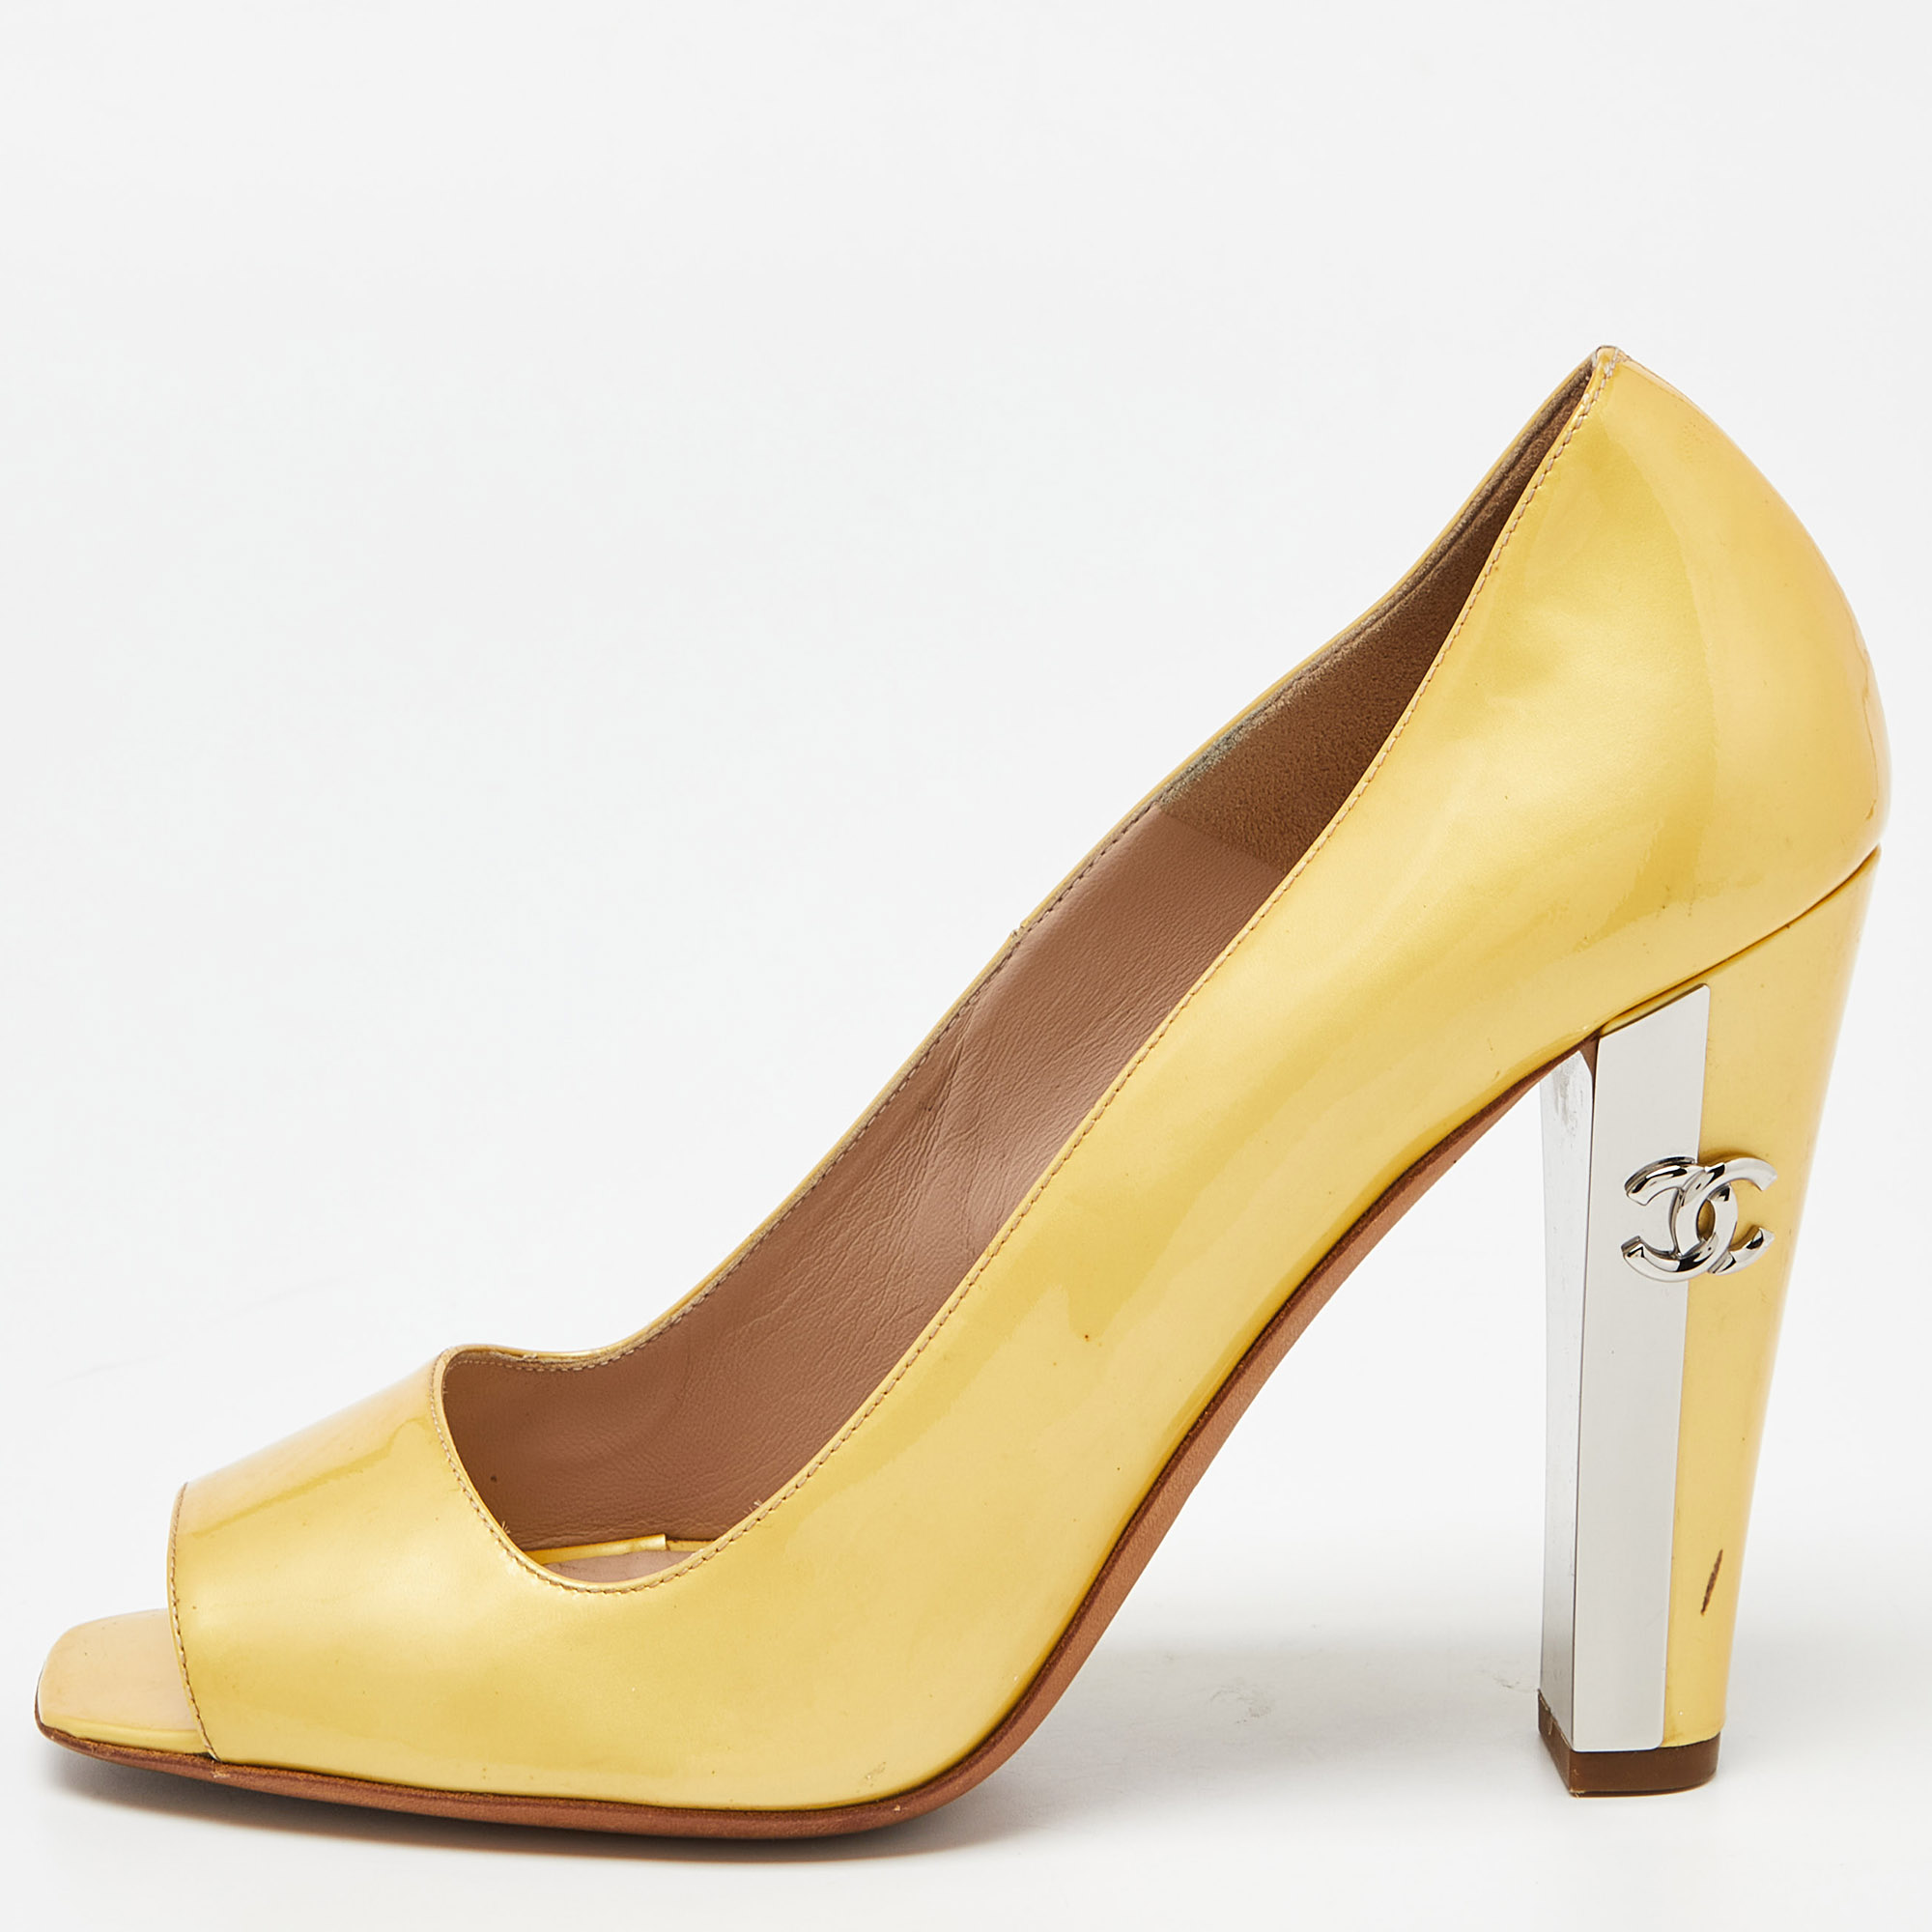 Pre-owned Chanel Yellow Patent Leather Cc Open Toe Pumps Size 38